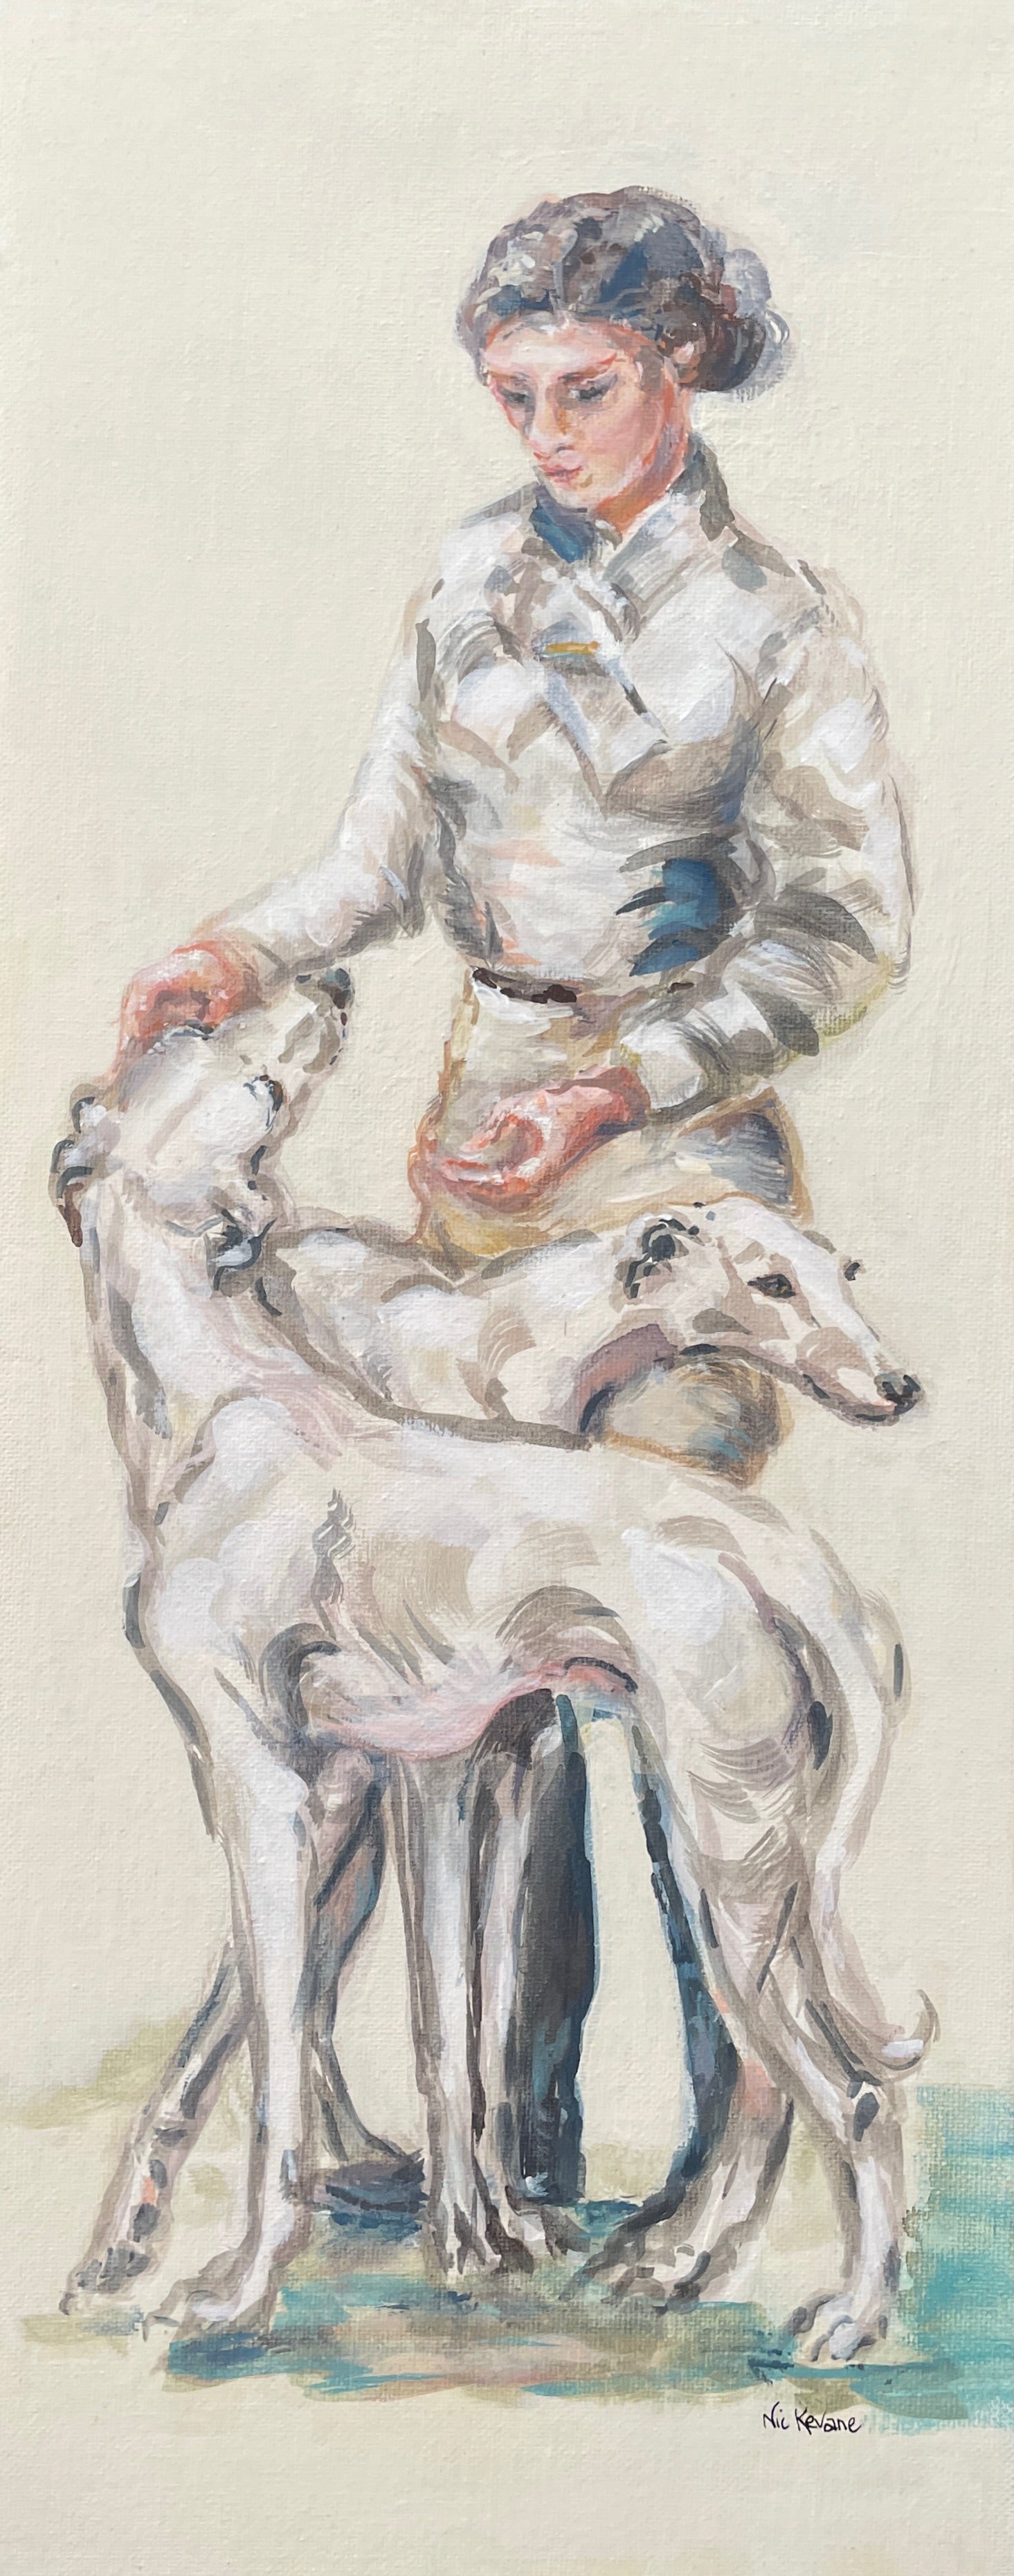 These paintings illustrate the timeless connection of people to their dogs. The elegance of gesture and devoted expression of the pale greyhounds is reminiscent of Art Deco decoration.